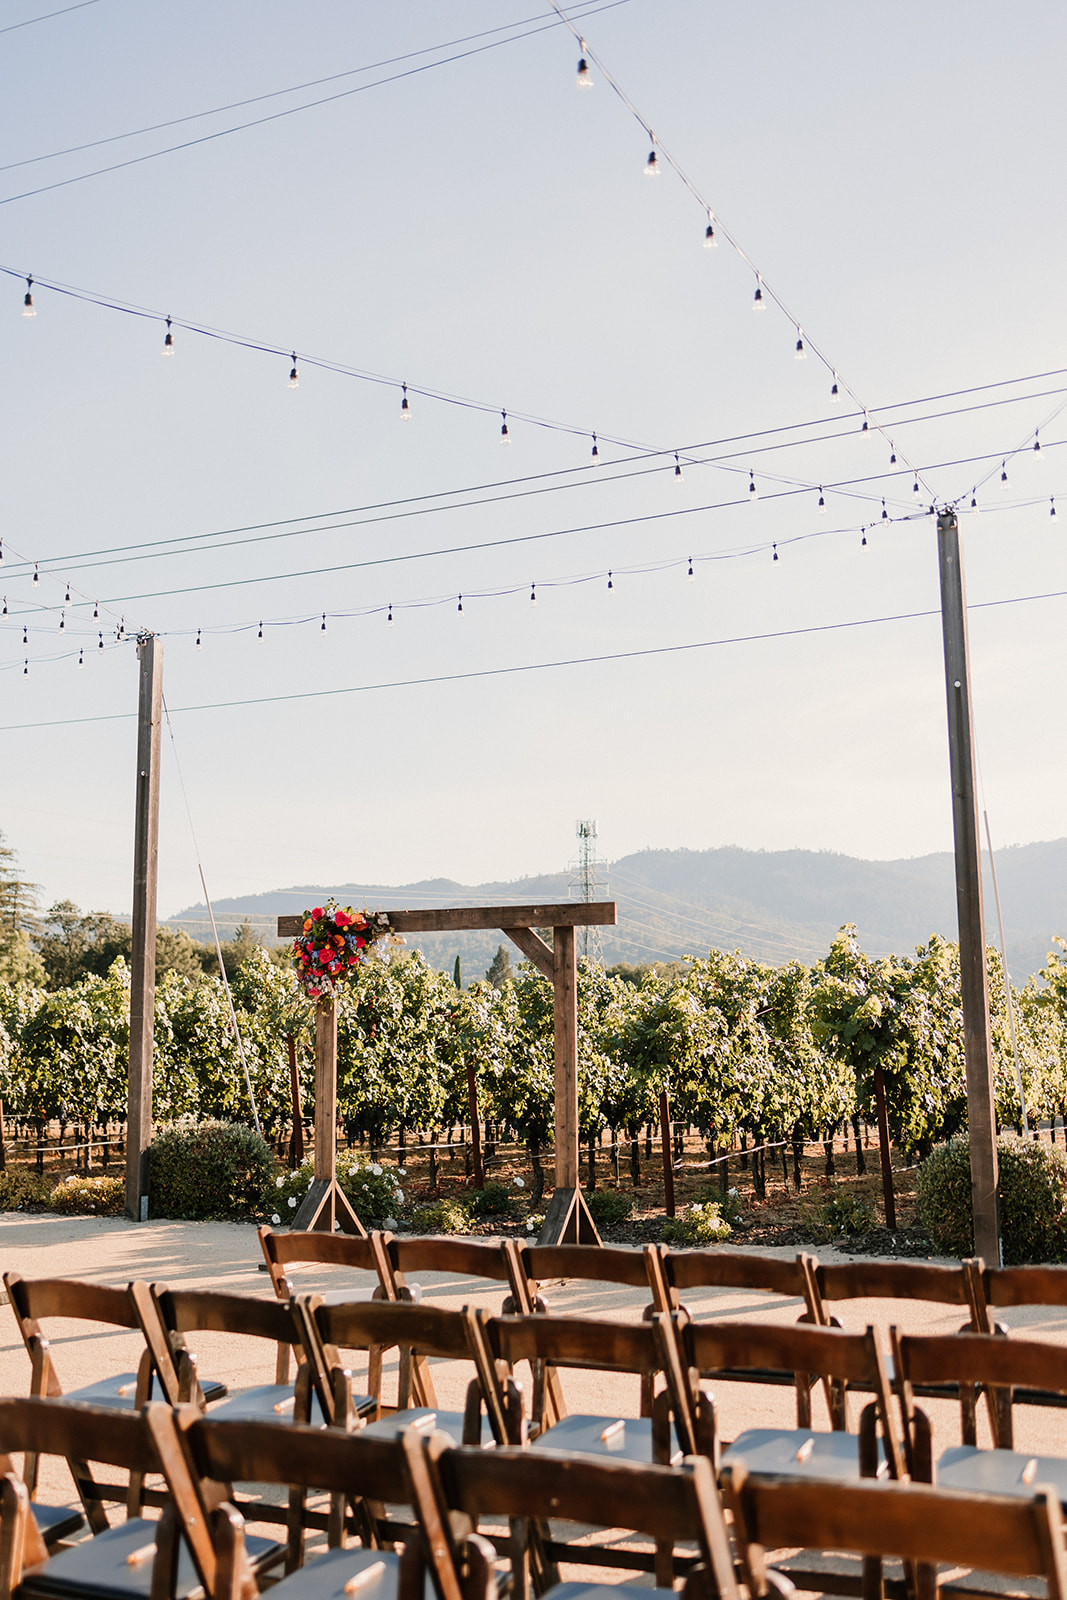 Wooden chairs arranged in rows at an outdoor venue, with a vineyard in the background and string lights above at Tre Posti wedding venue